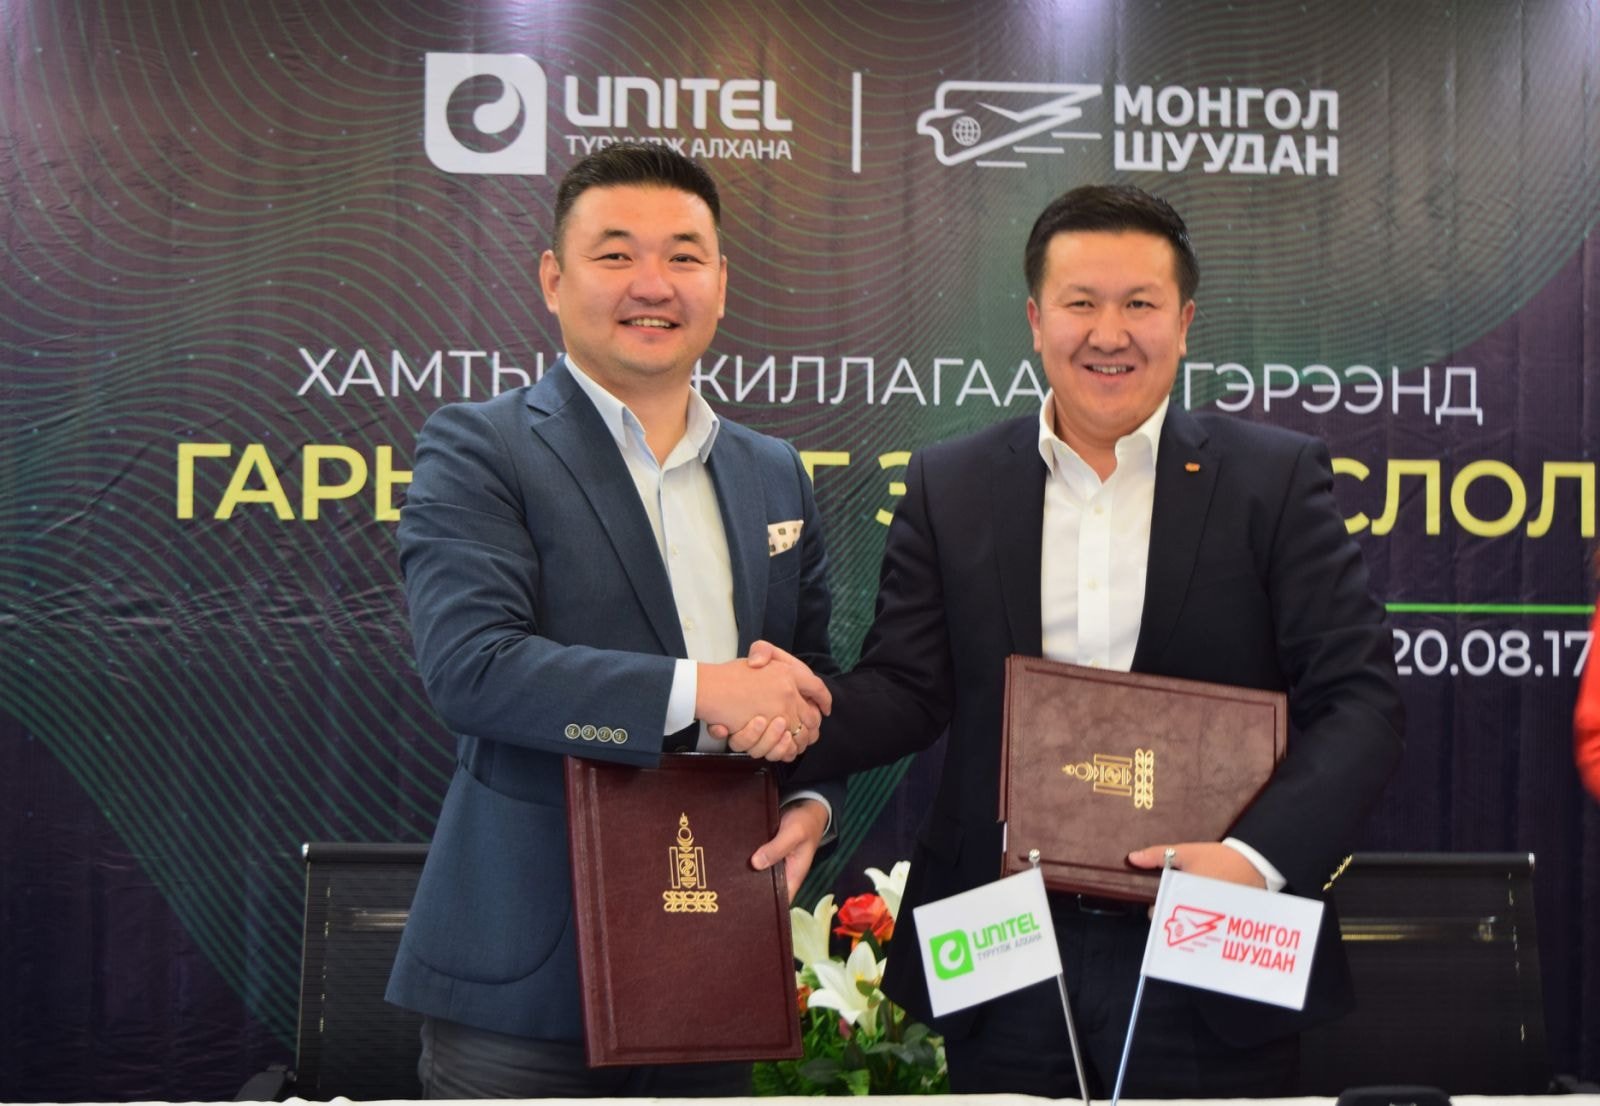 Mongol Post has agreed to provide services in cooperation with Unitel Group